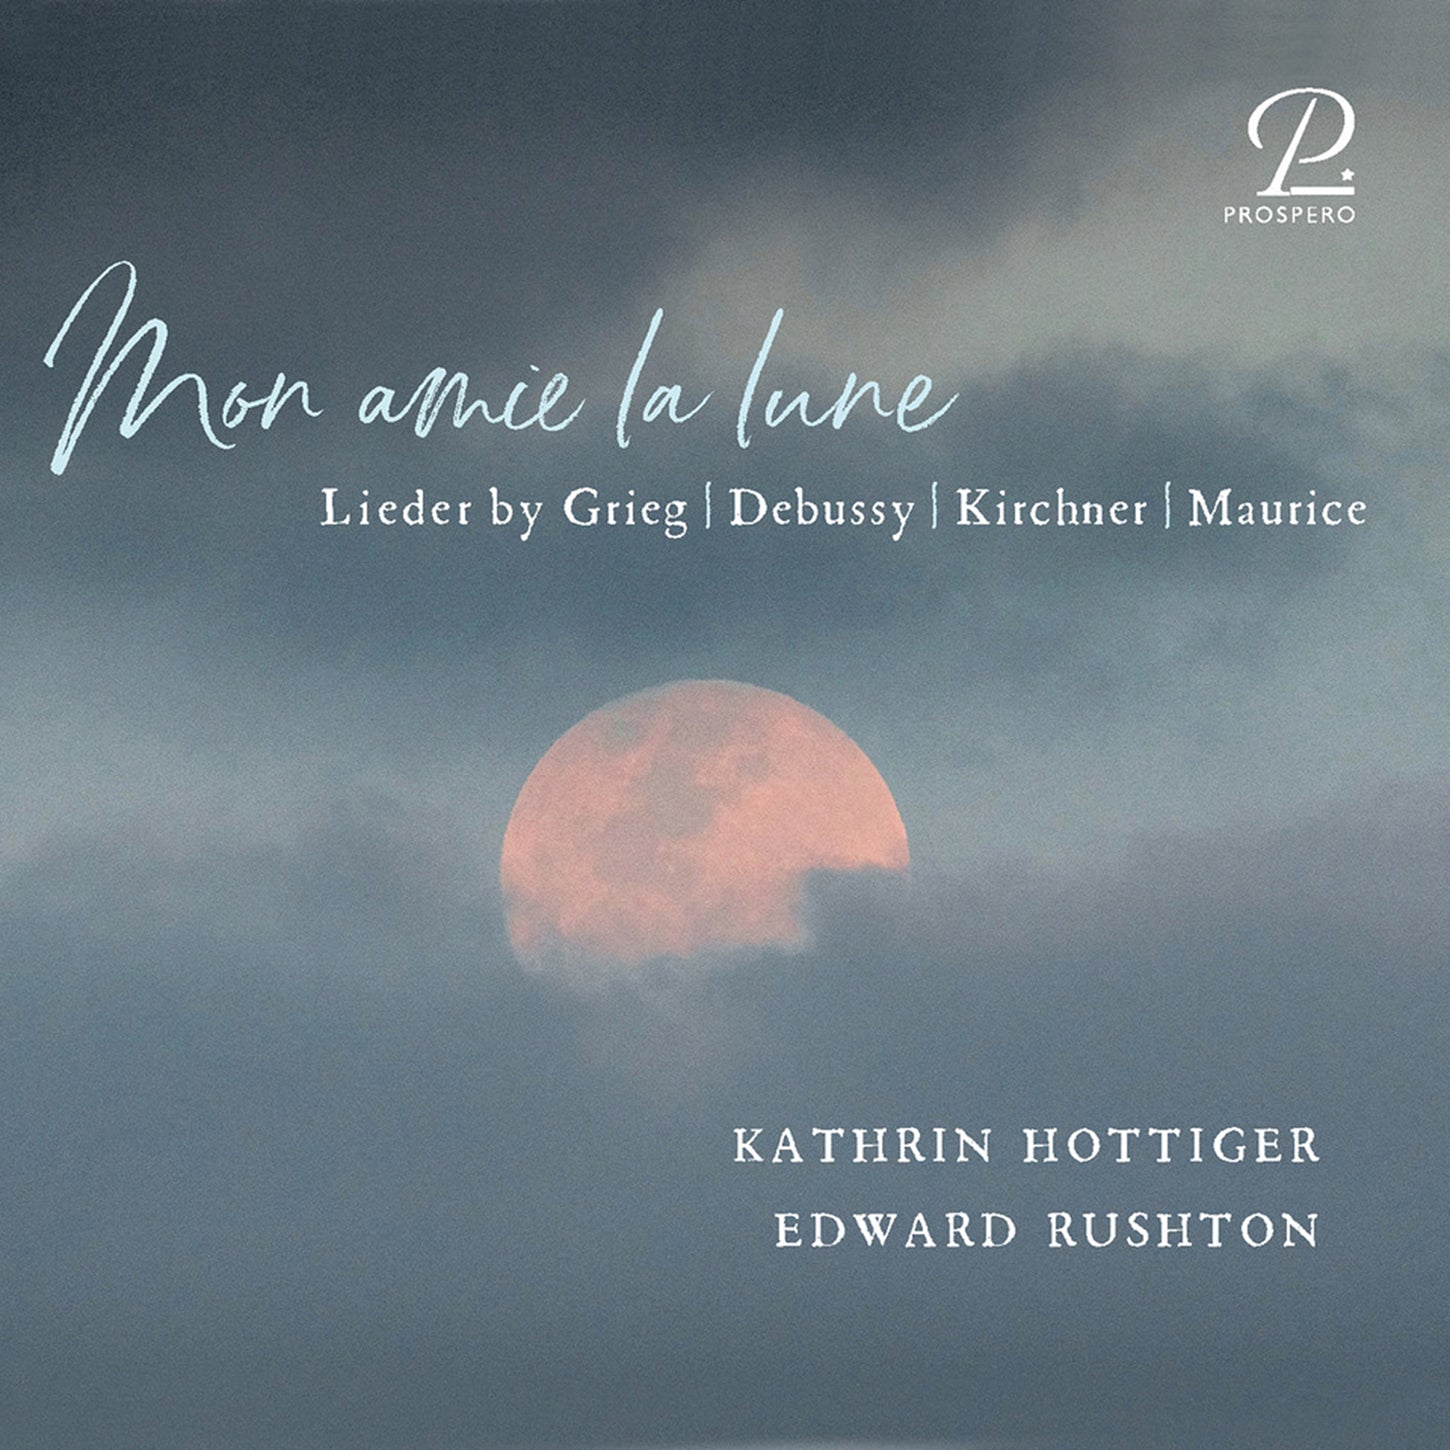 Grieg, Debussy, Kirchner, & Maurice: Mon amie la lune - Songs & Piano Pieces